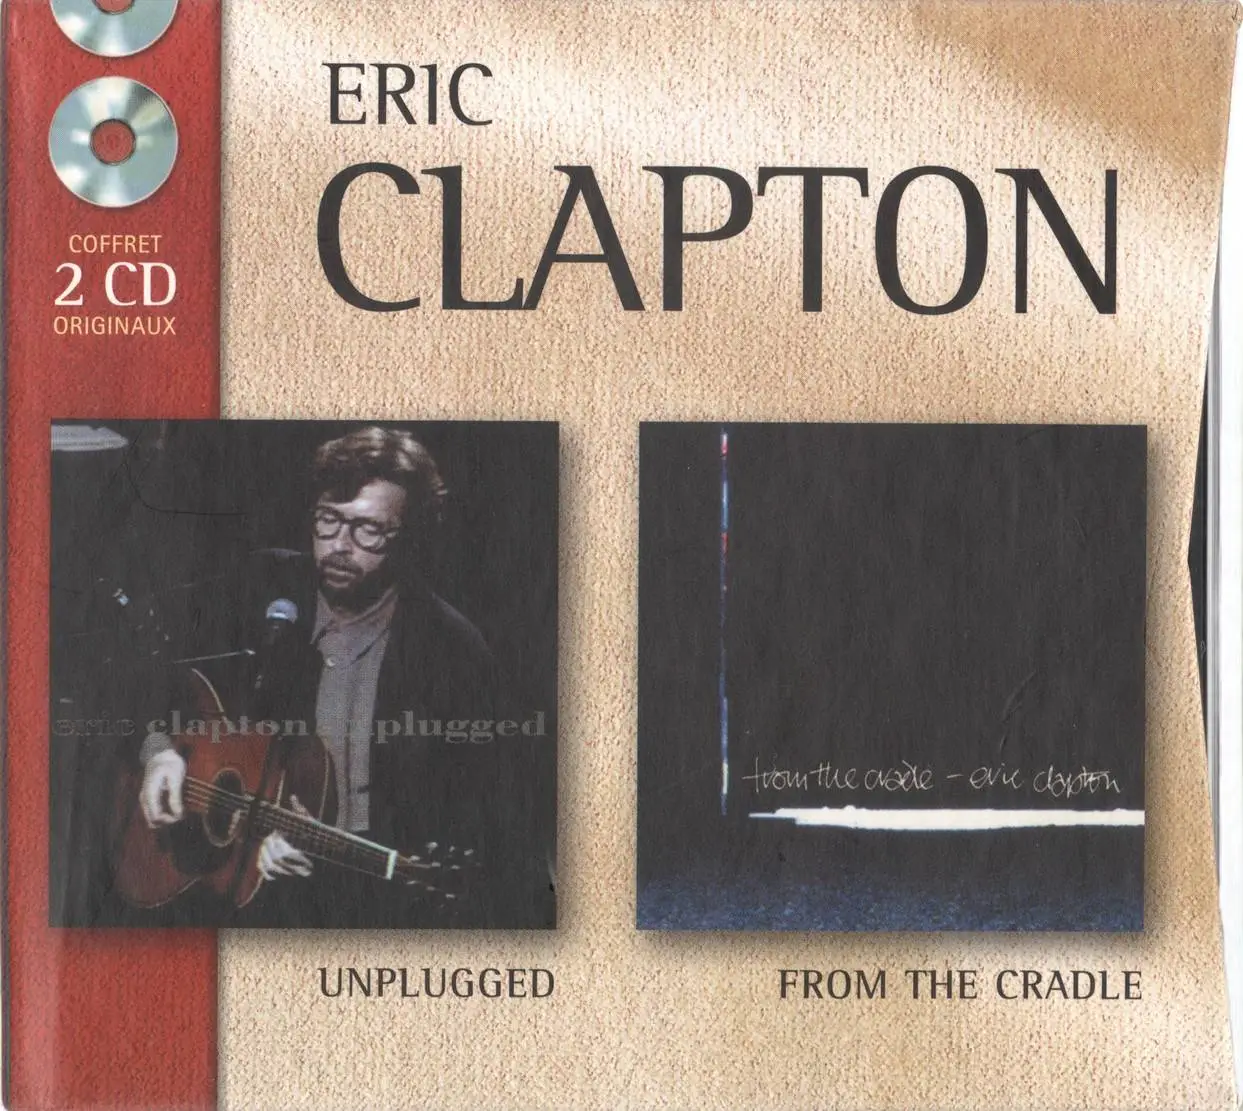 Eric Clapton Coffret 2cd Originaux Unplugged From The Cradle 2002 {2cd Set Warner France